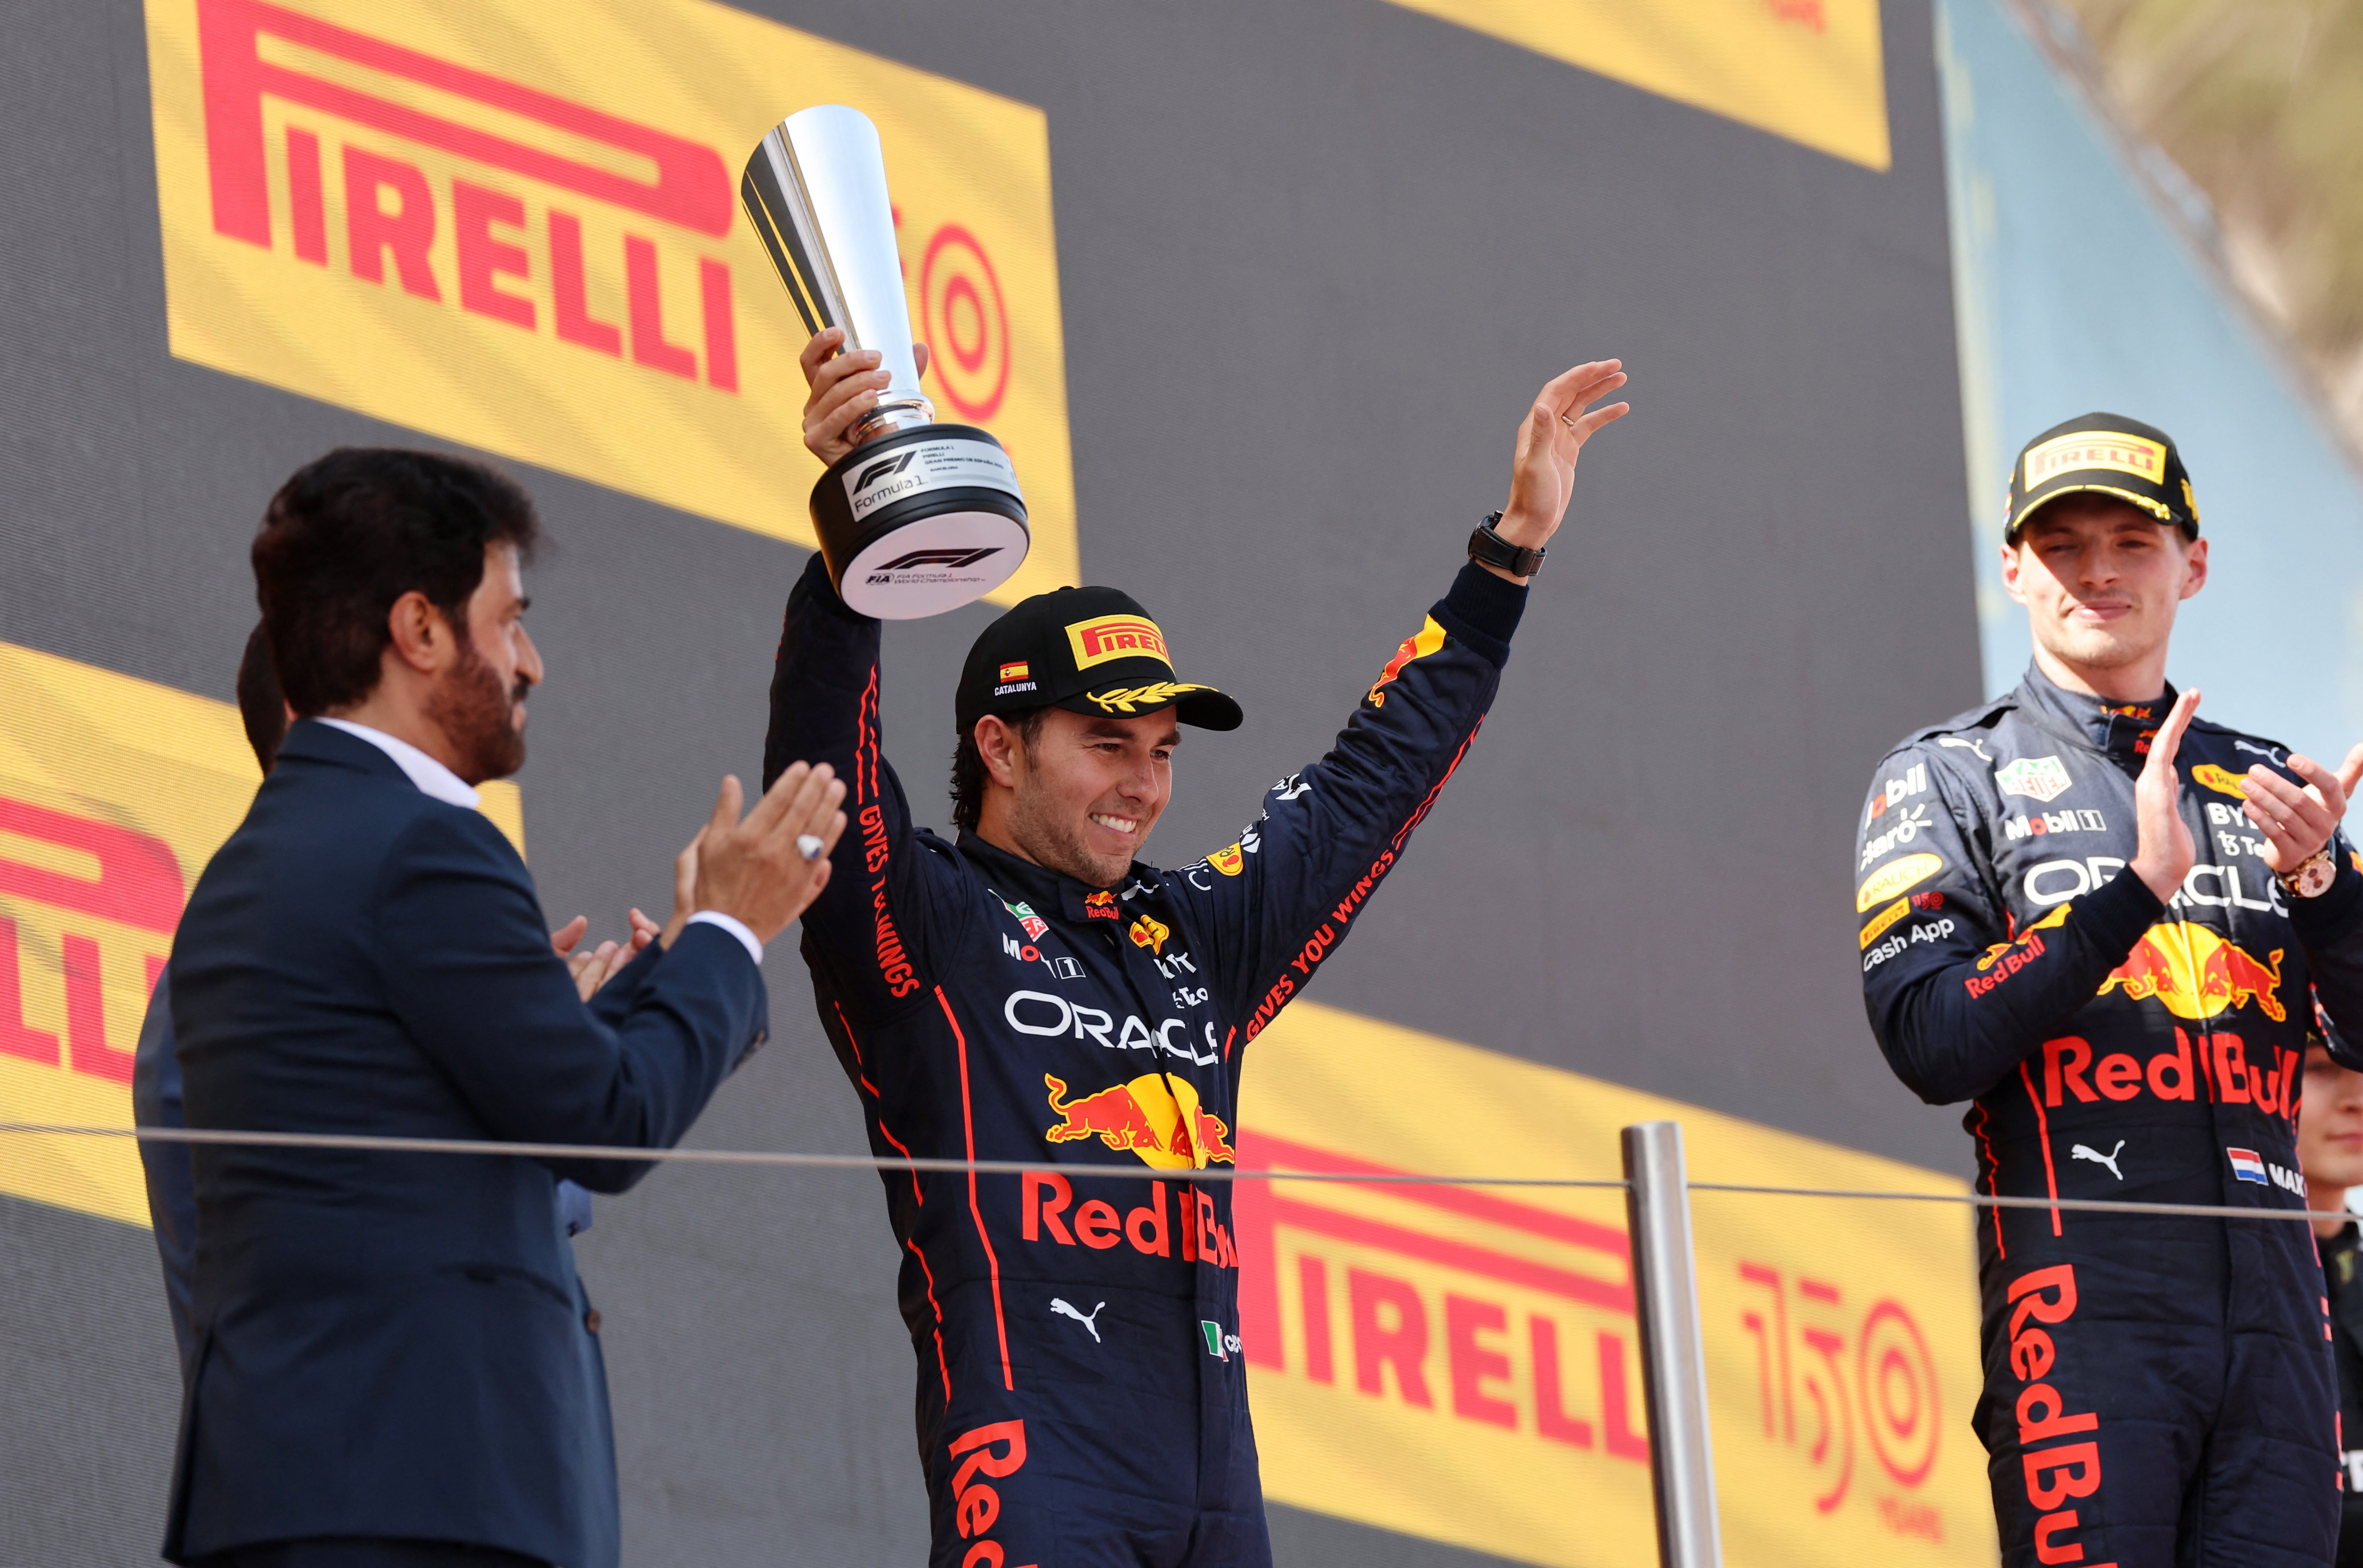 Formula One F1 - Spanish Grand Prix - Circuit de Barcelona-Catalunya, Barcelona, ​​Spain - May 22, 2022 Second placed Sergio Perez of Red Bull celebrates on the podium alongside first placed Max Verstappen of Red Bull after the race REUTERS/Nacho Doce